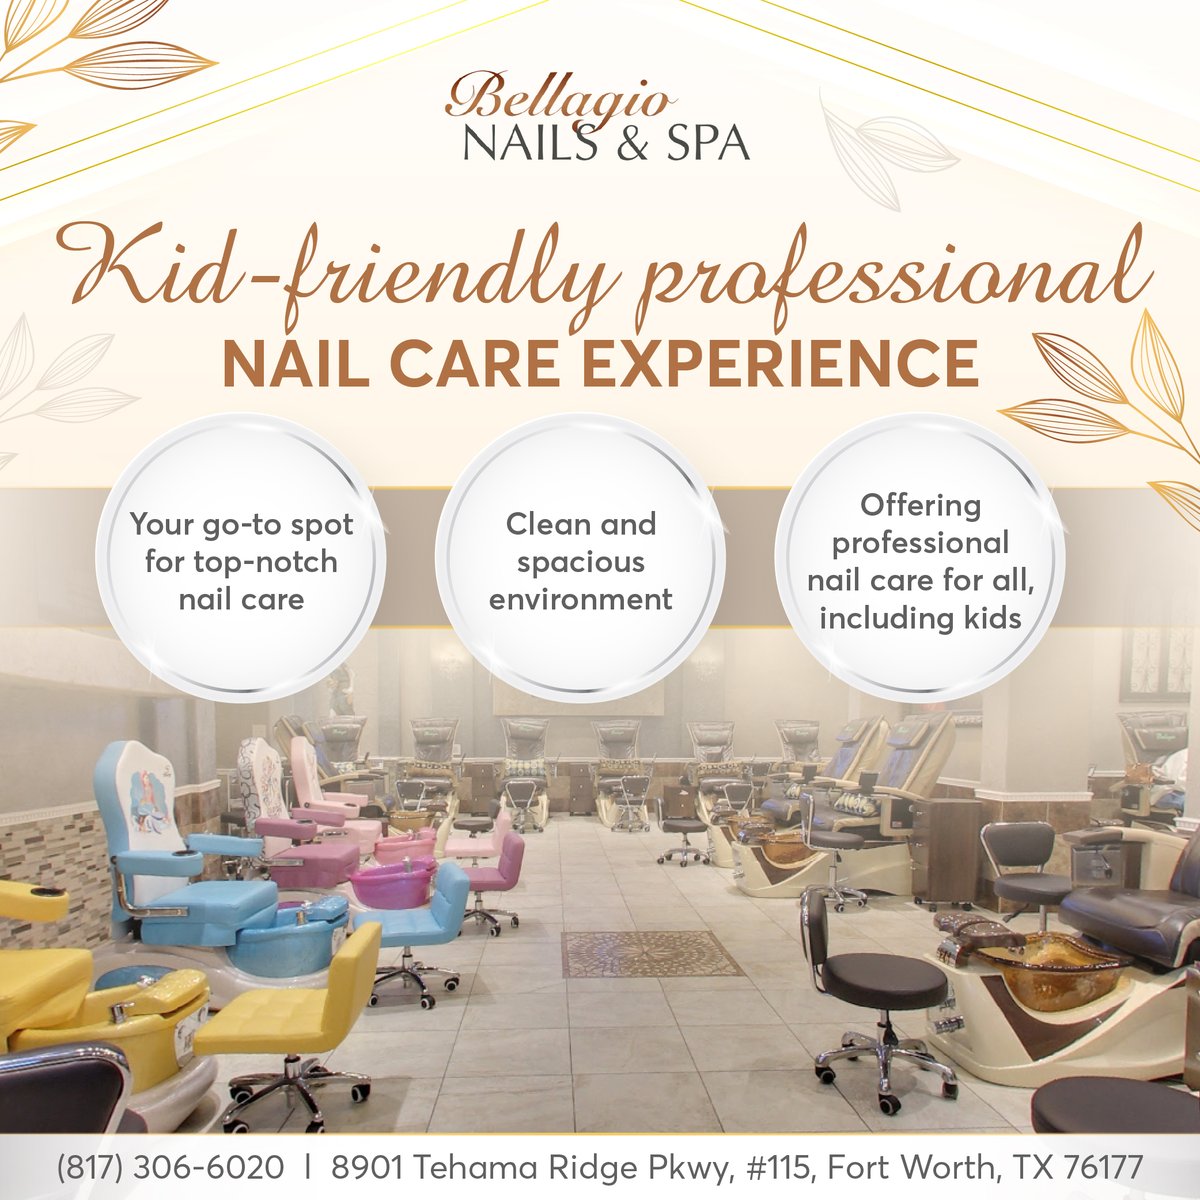 🌟 Elevate your nail care experience with Bellagio Nails & Spa! 
#bellagionailspa #bellagiotx #bellagionails #bellagiofortworth #nailsalonfortworth #nailsalontx #nail #nailsoftheday #longnails #naildesign